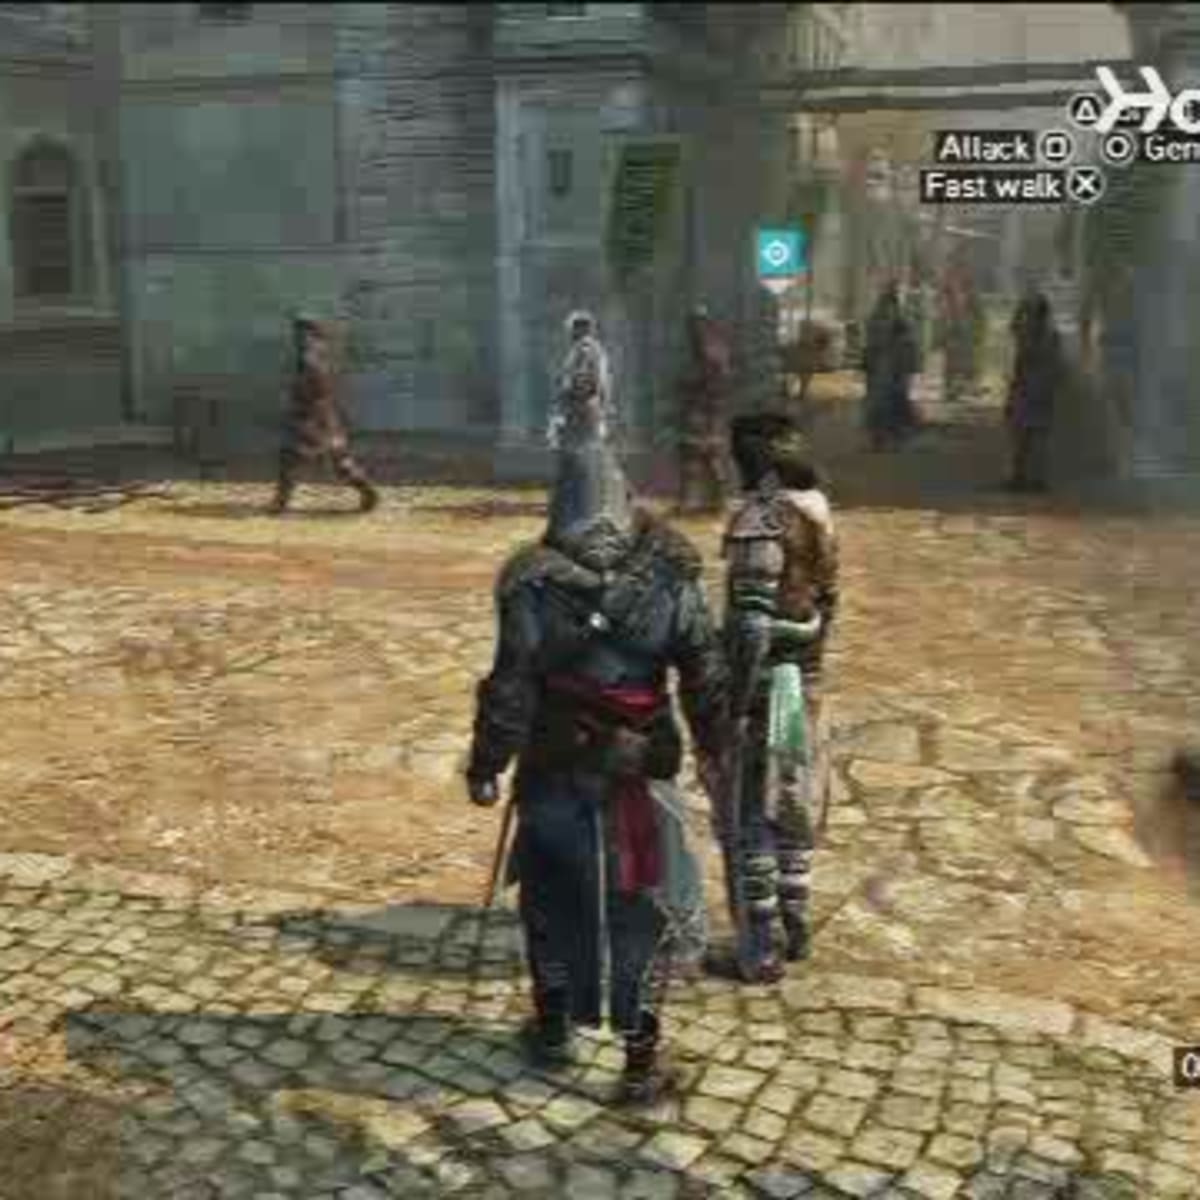 Assassin's Creed Revelations Walkthrough Part 13 - On the Attack